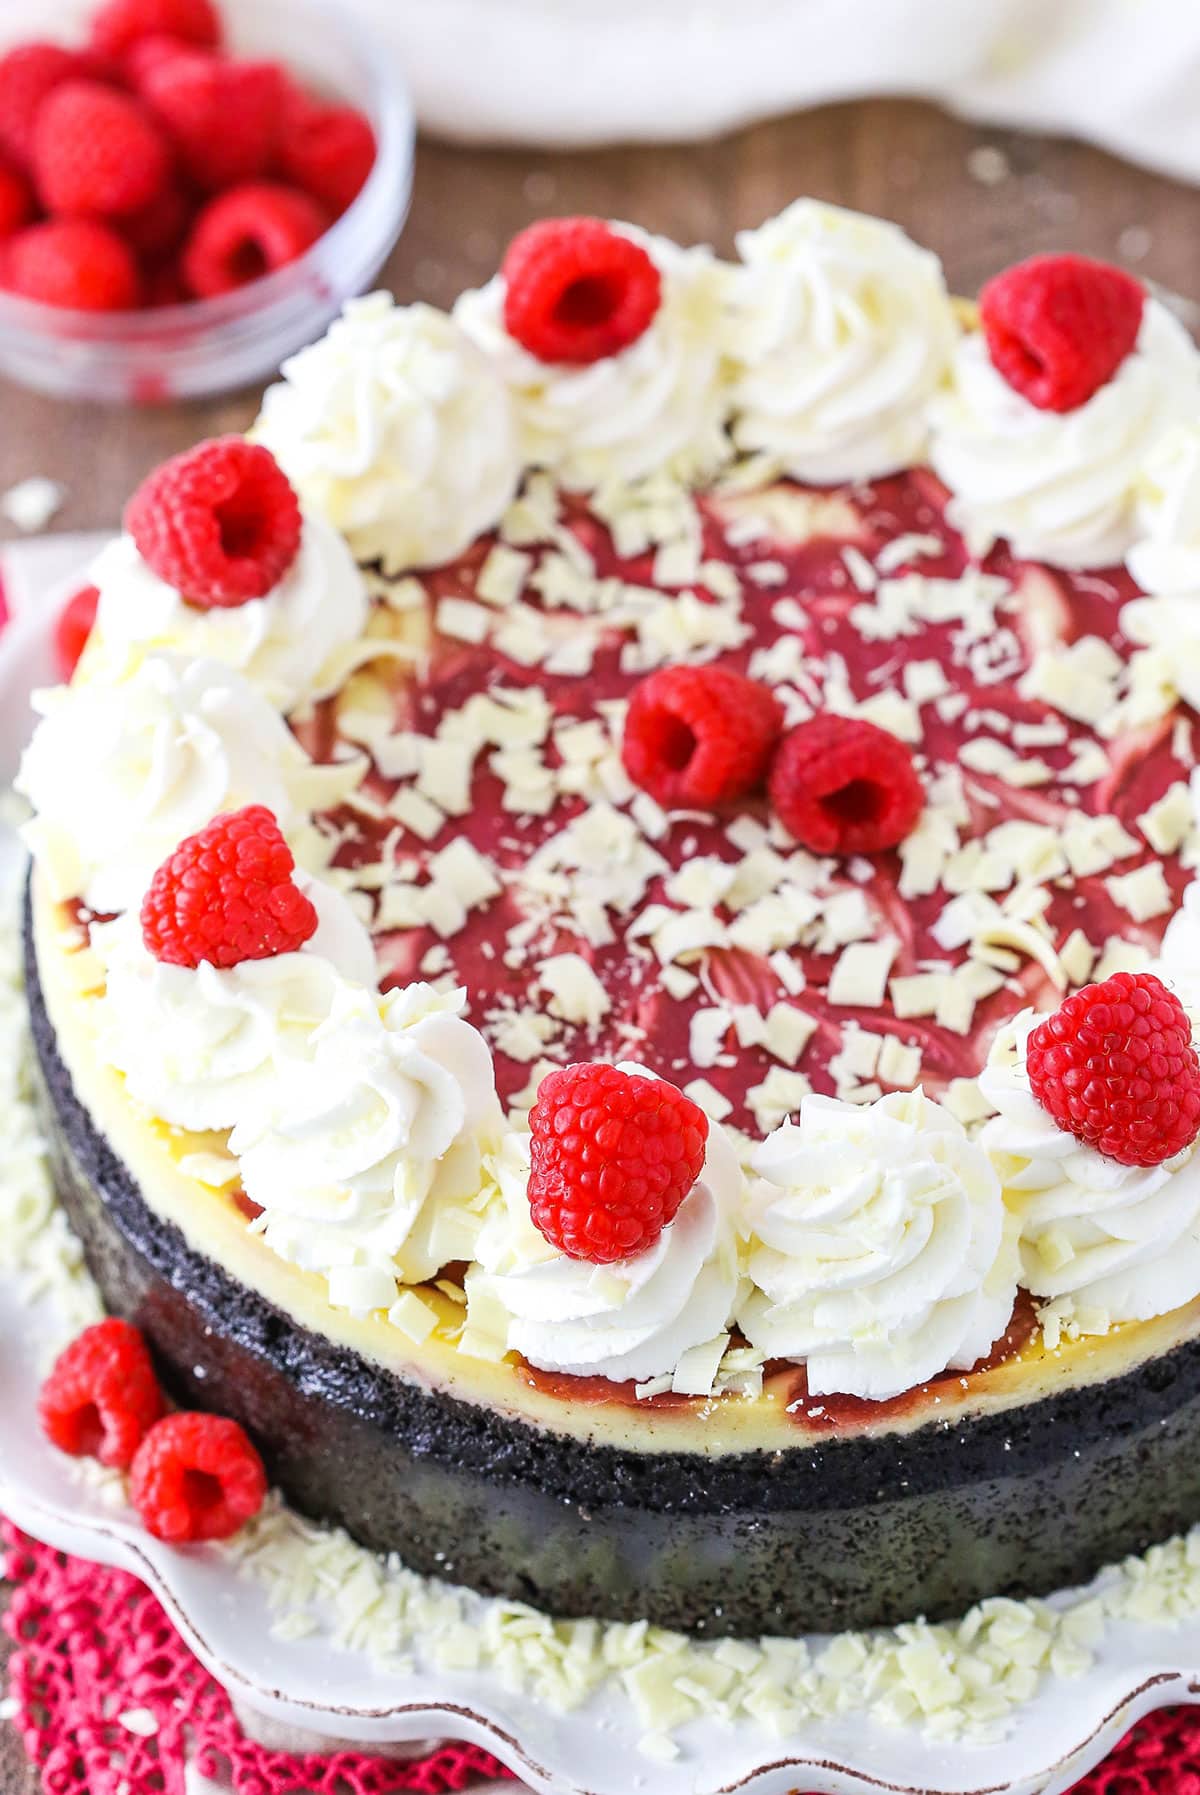 A full White Chocolate Raspberry Cheesecake with white swirls and raspberries on top, served on a white platter